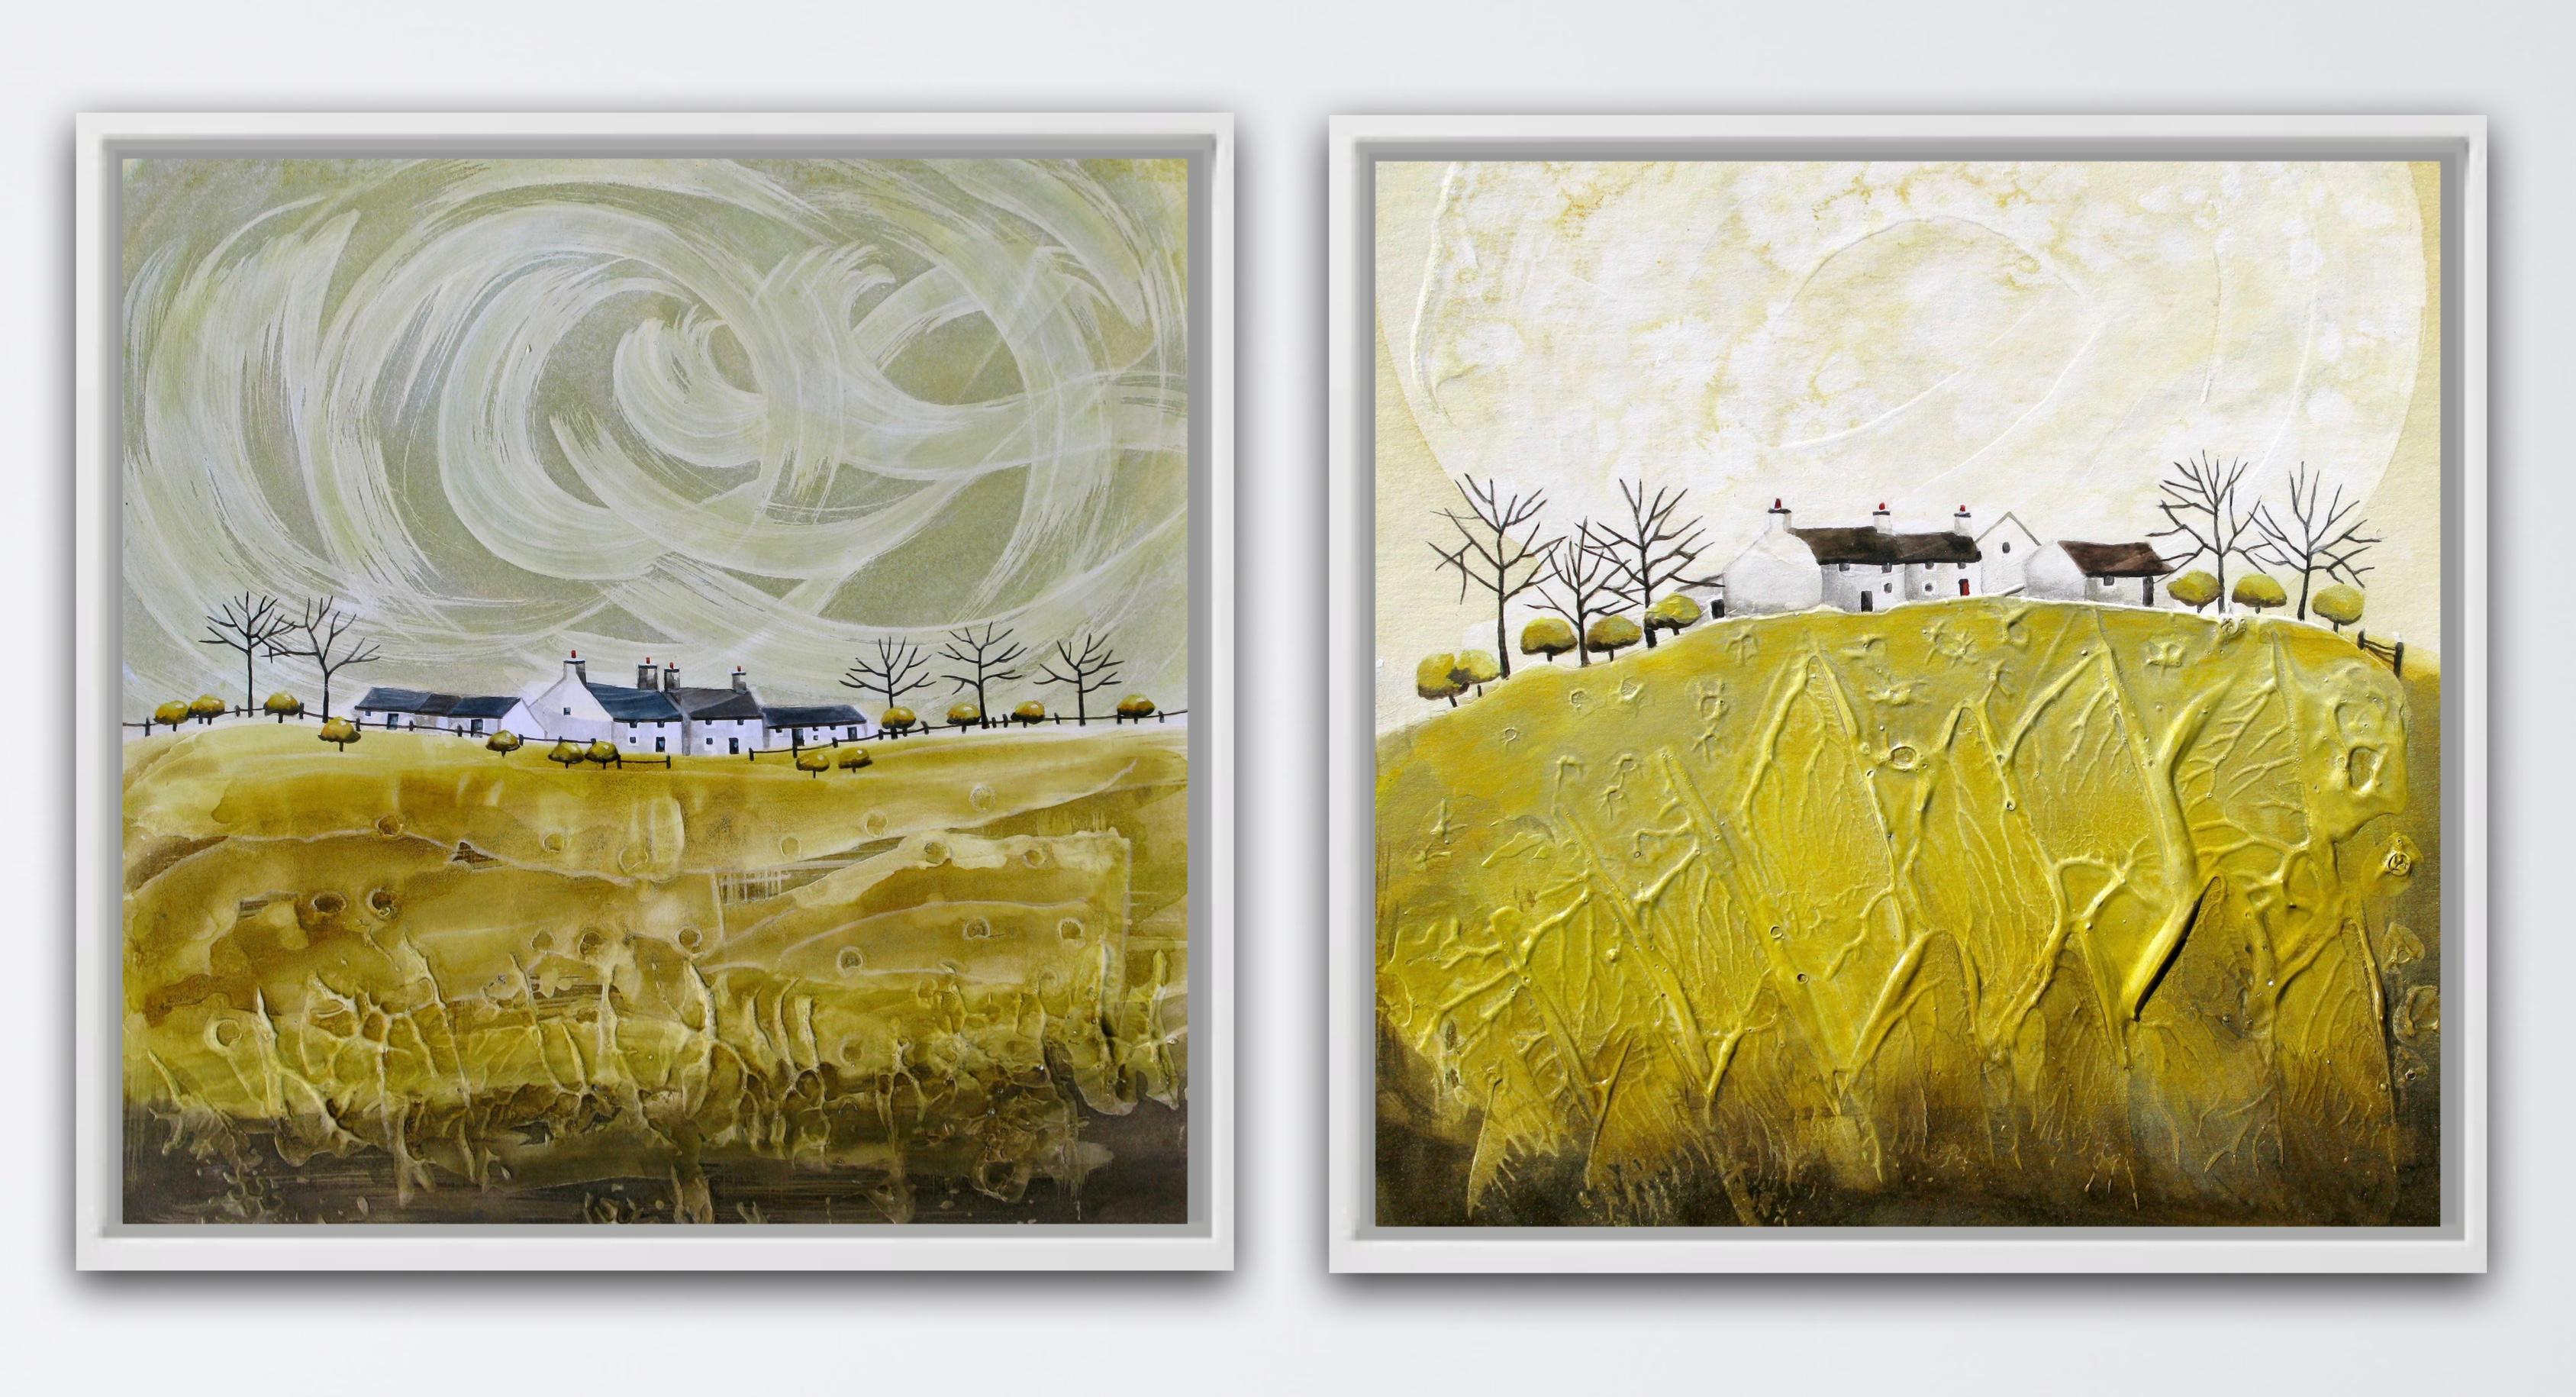 Anya Simmons Landscape Painting - Crater Valley Farm and Crater Cottages 3 diptych